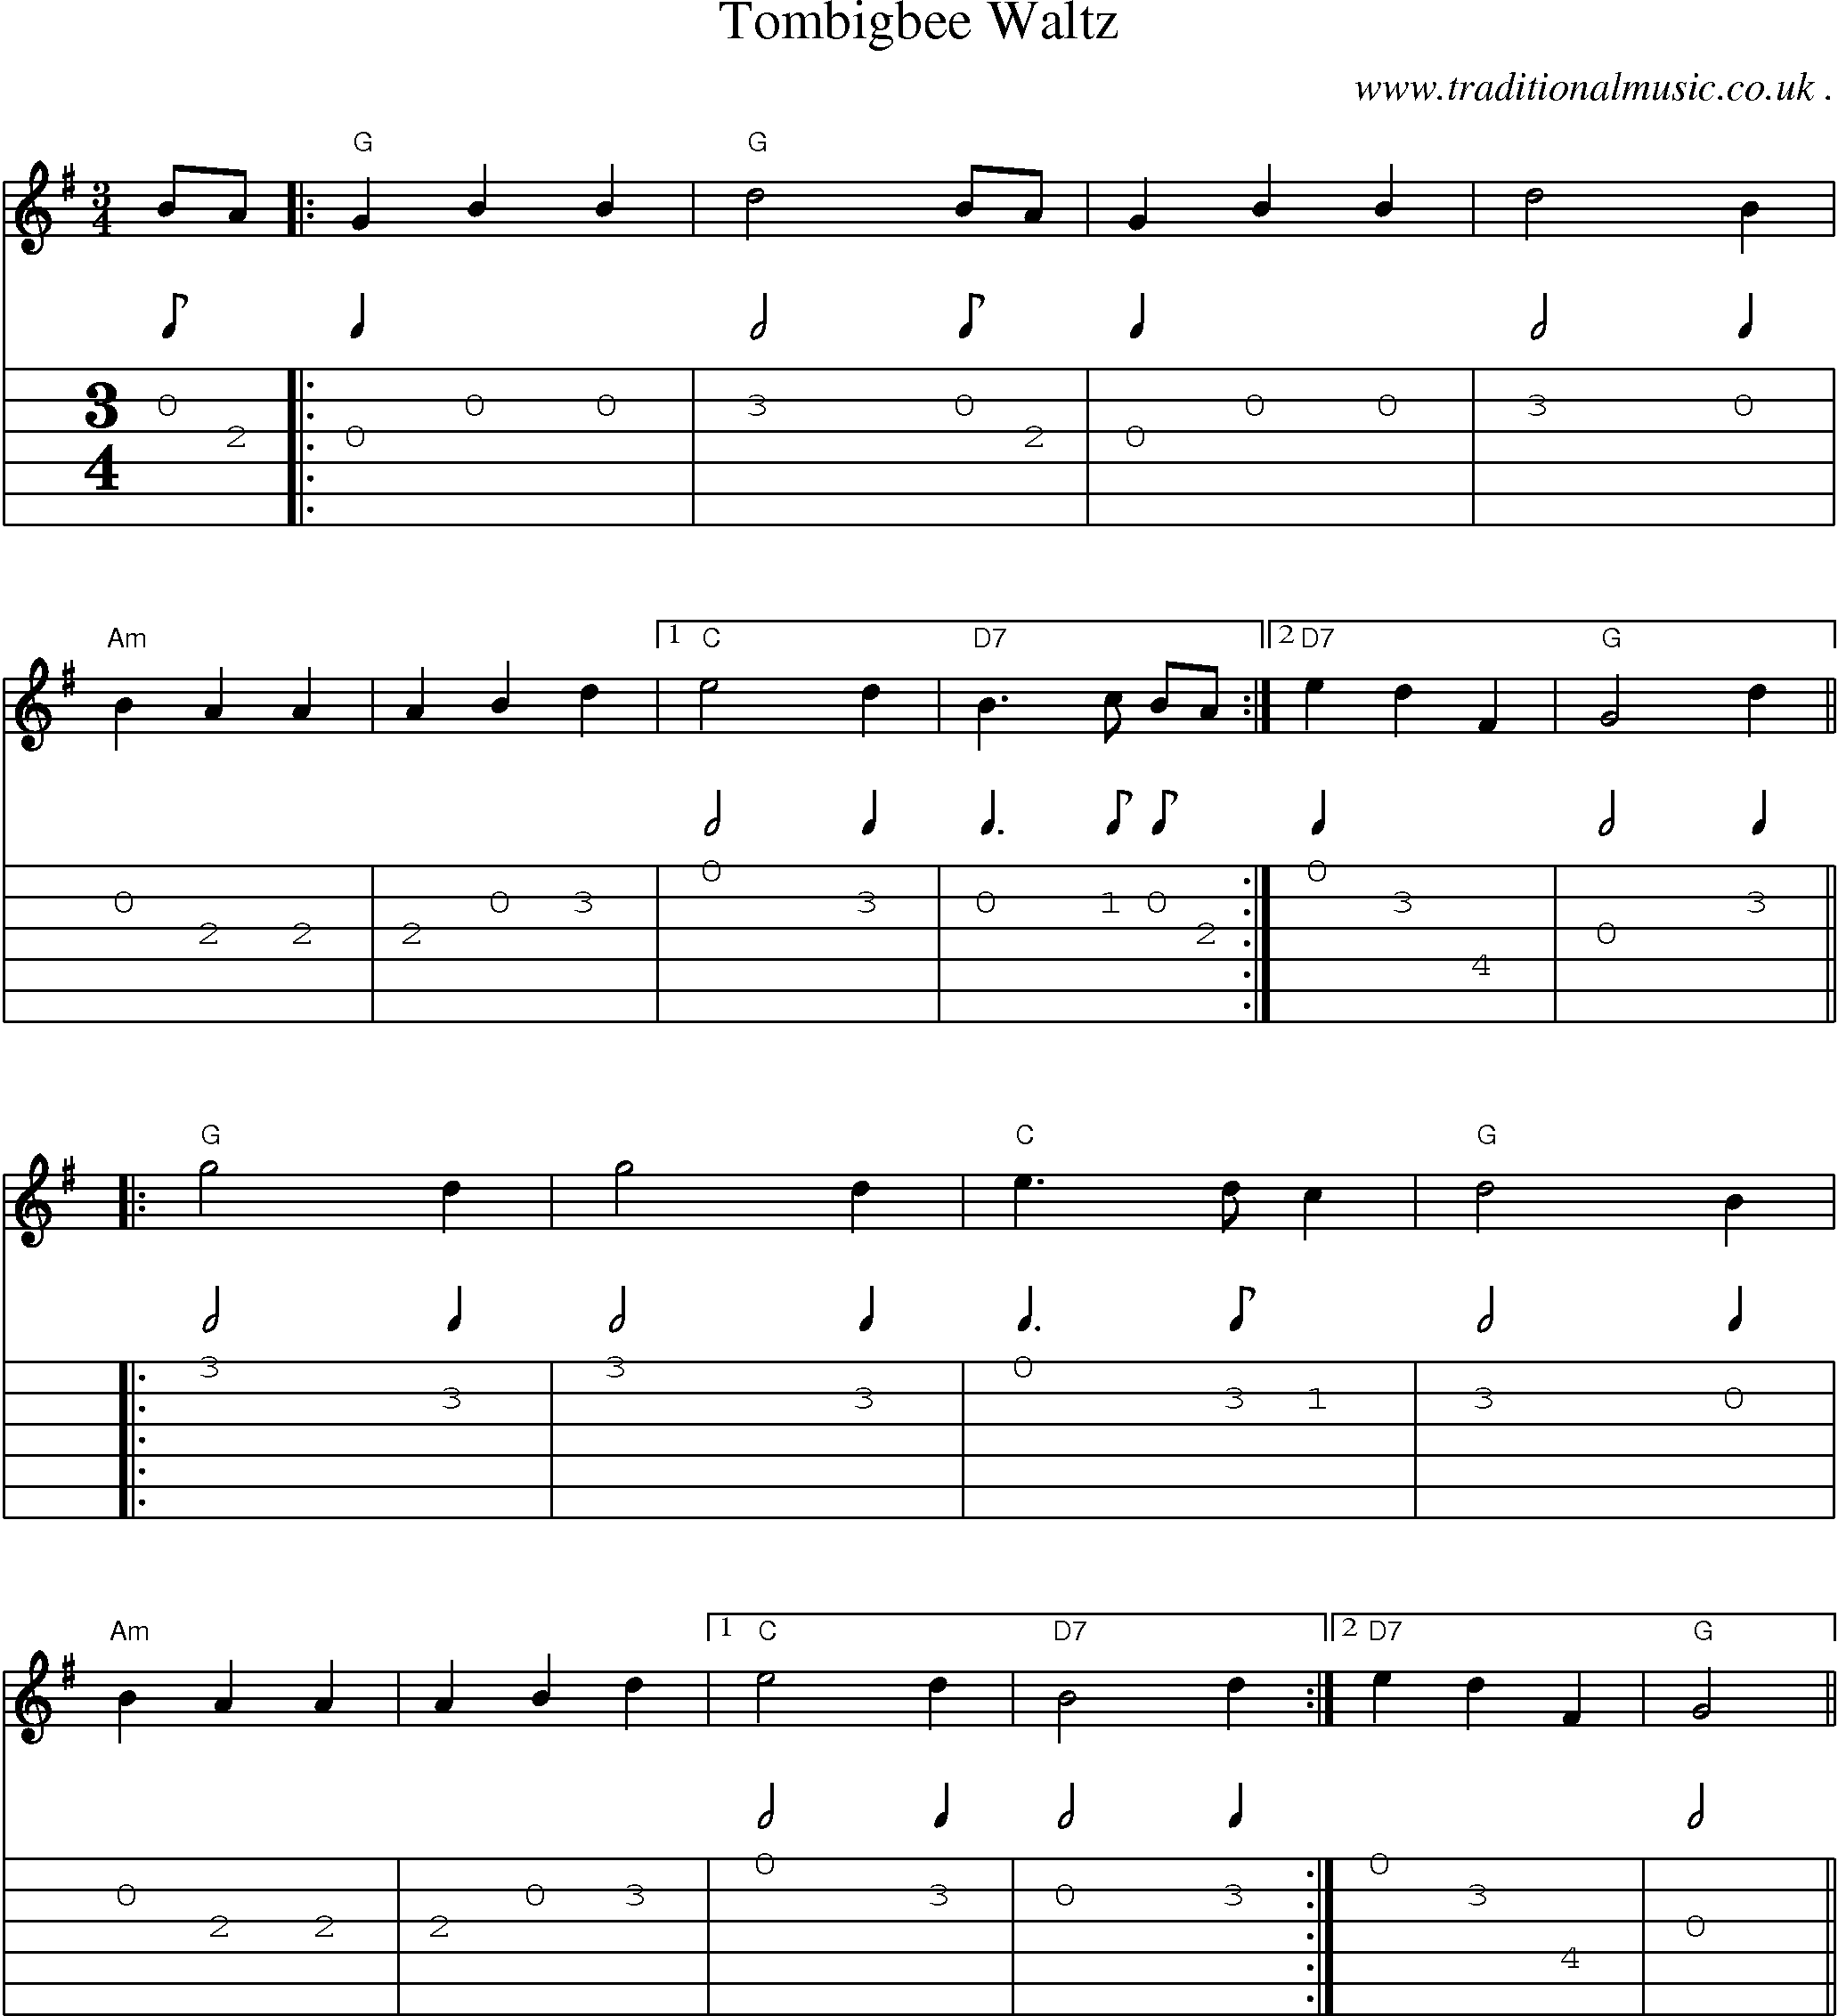 Music Score and Guitar Tabs for Tombigbee Waltz